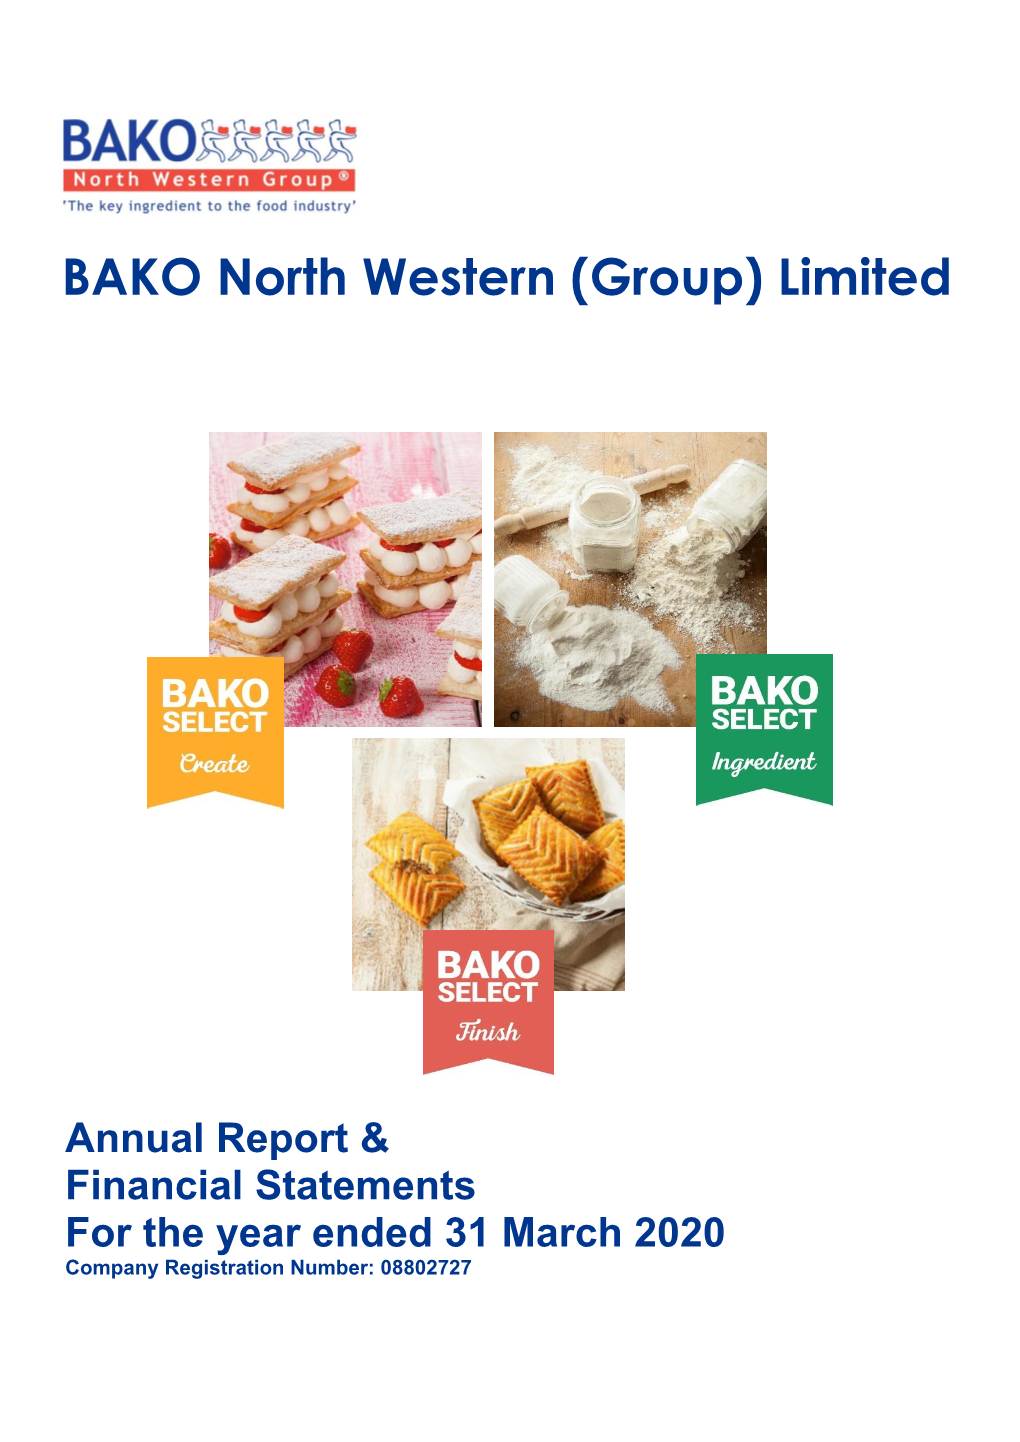 BAKO North Western (Group) Limited